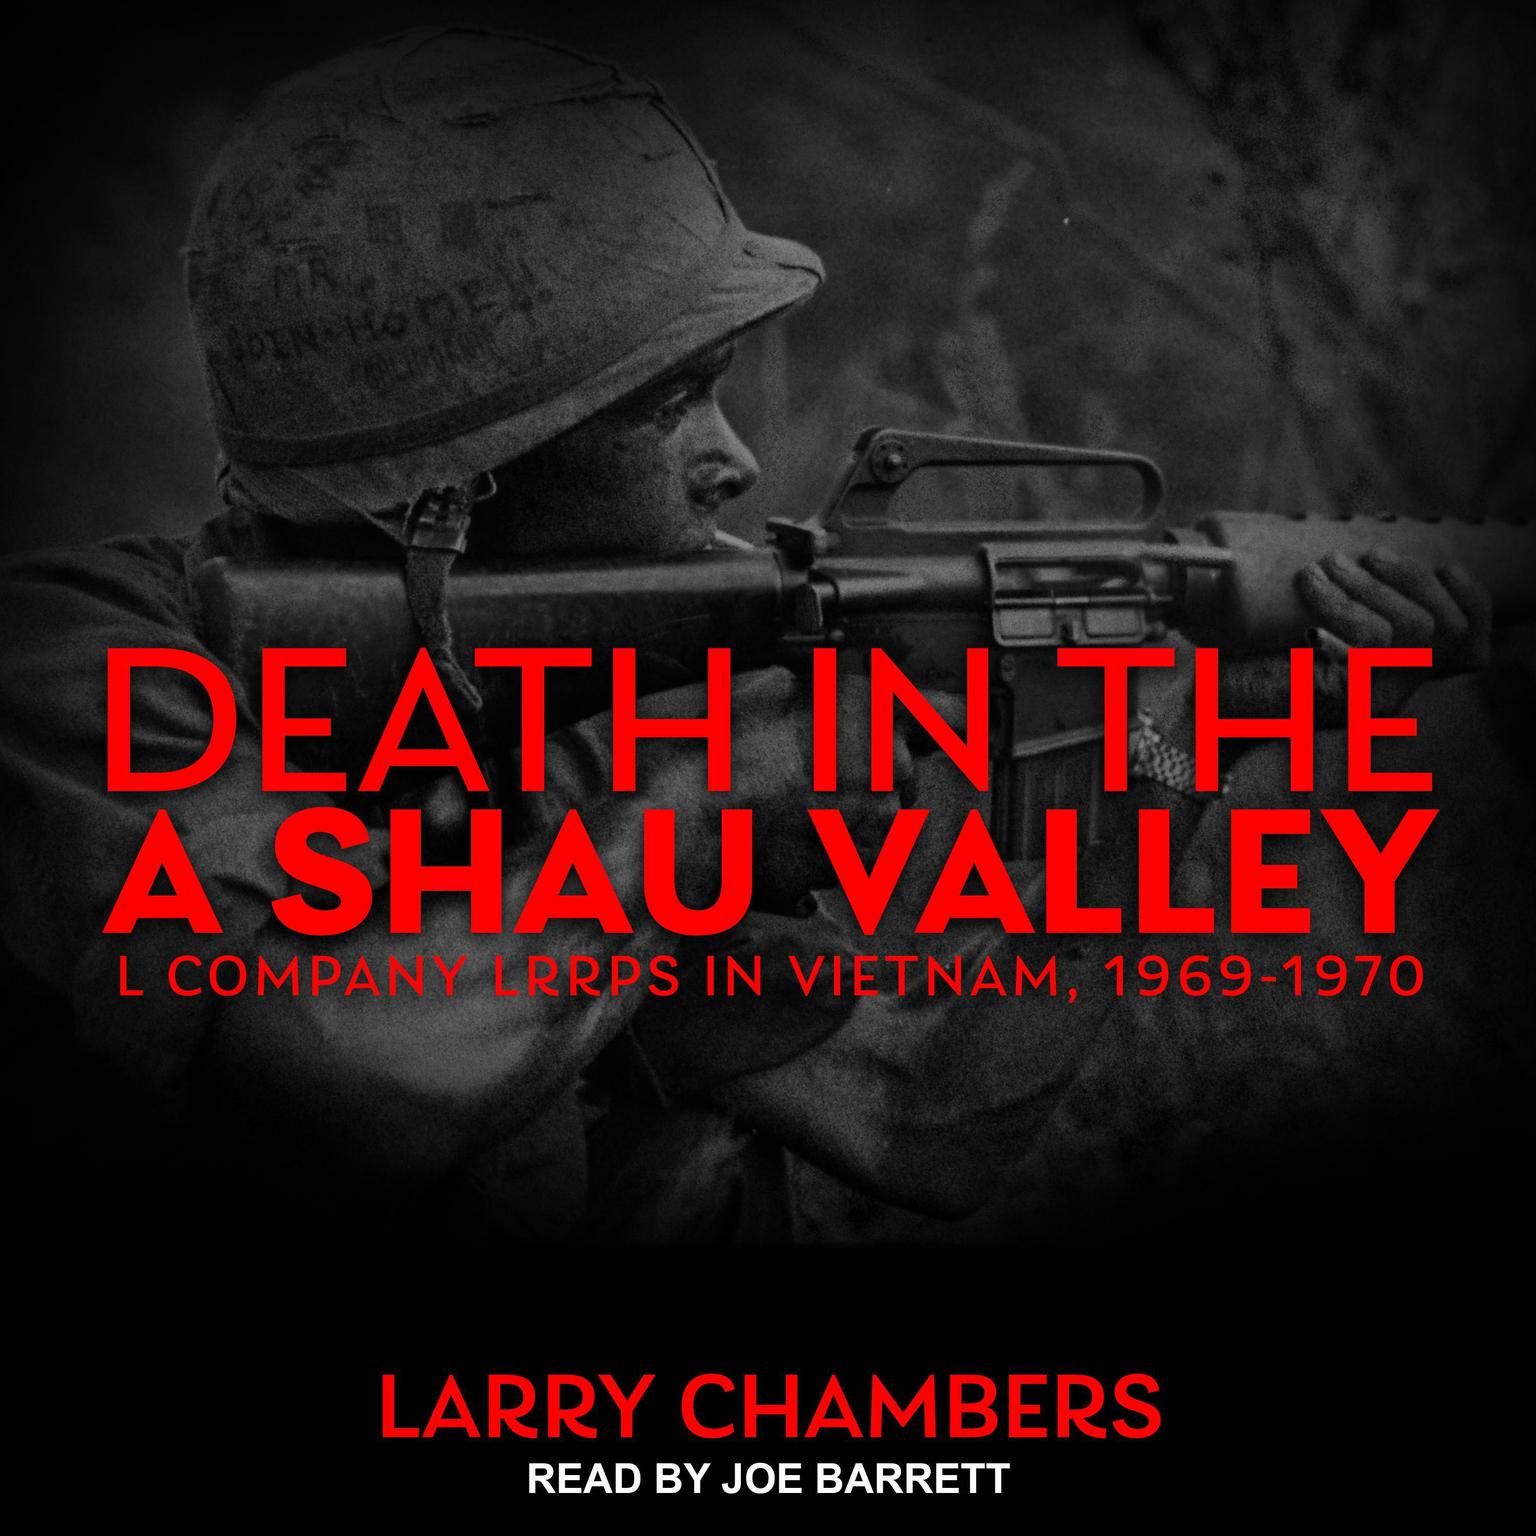 Death in the A Shau Valley: L Company LRRPs in Vietnam, 1969-1970 Audiobook, by Larry Chambers